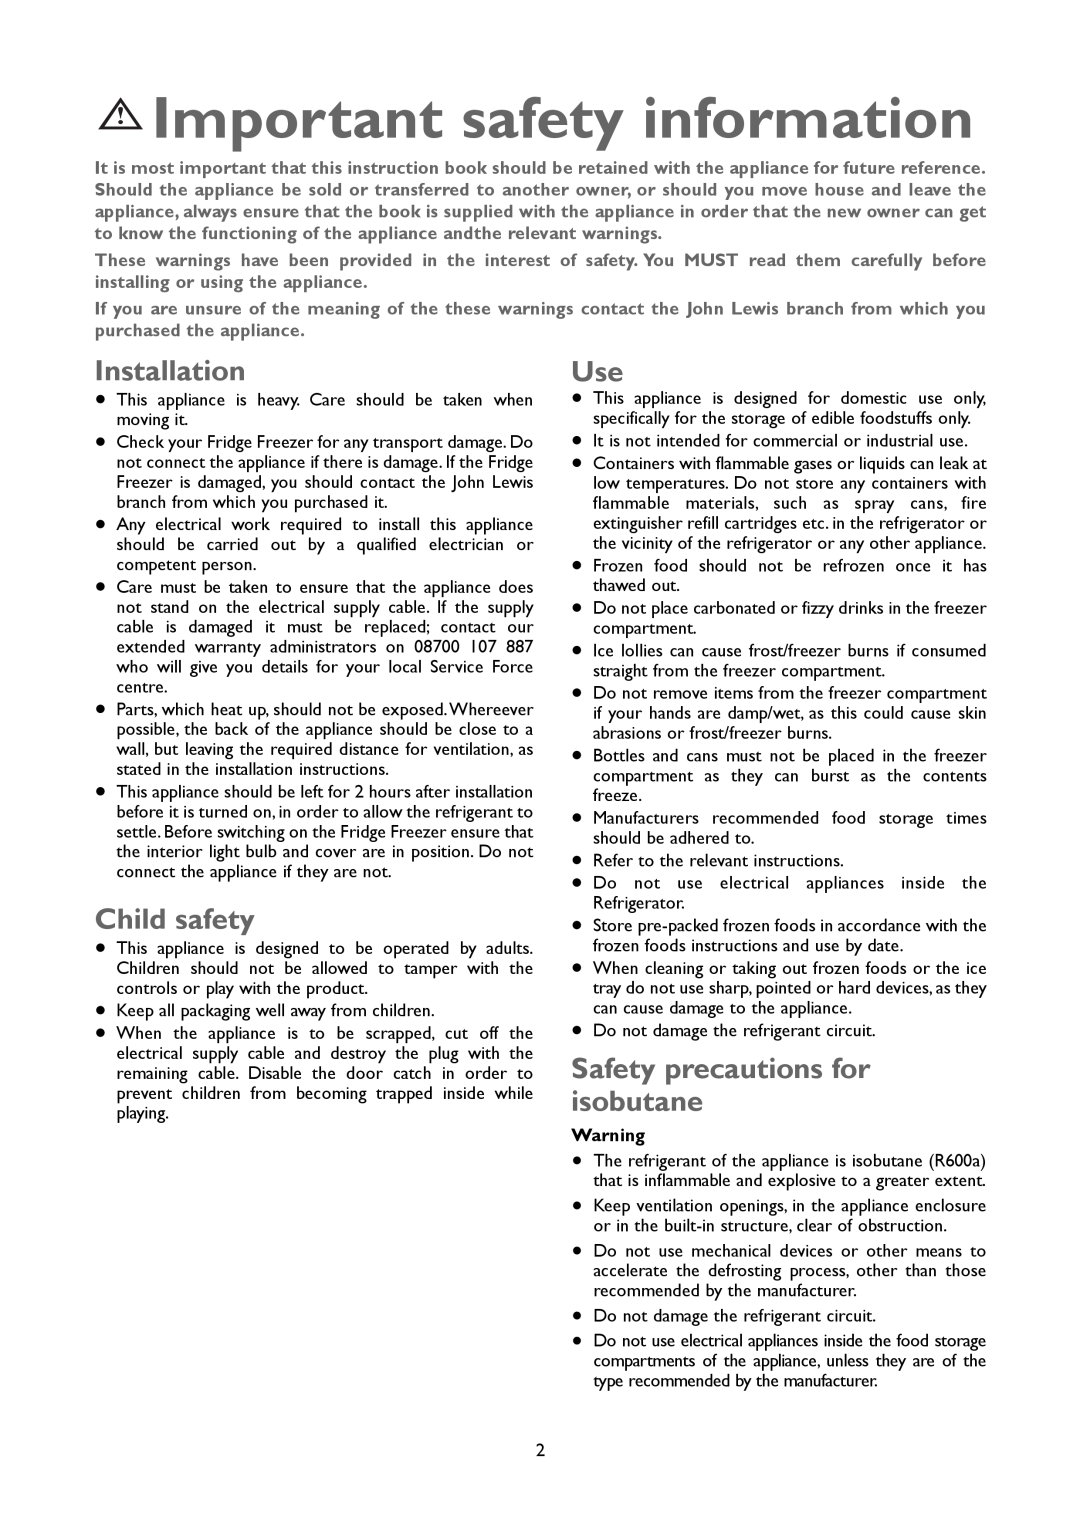 John Lewis JLFFW2005 Important safety information, Installation, Child safety, Safety precautions for isobutane 